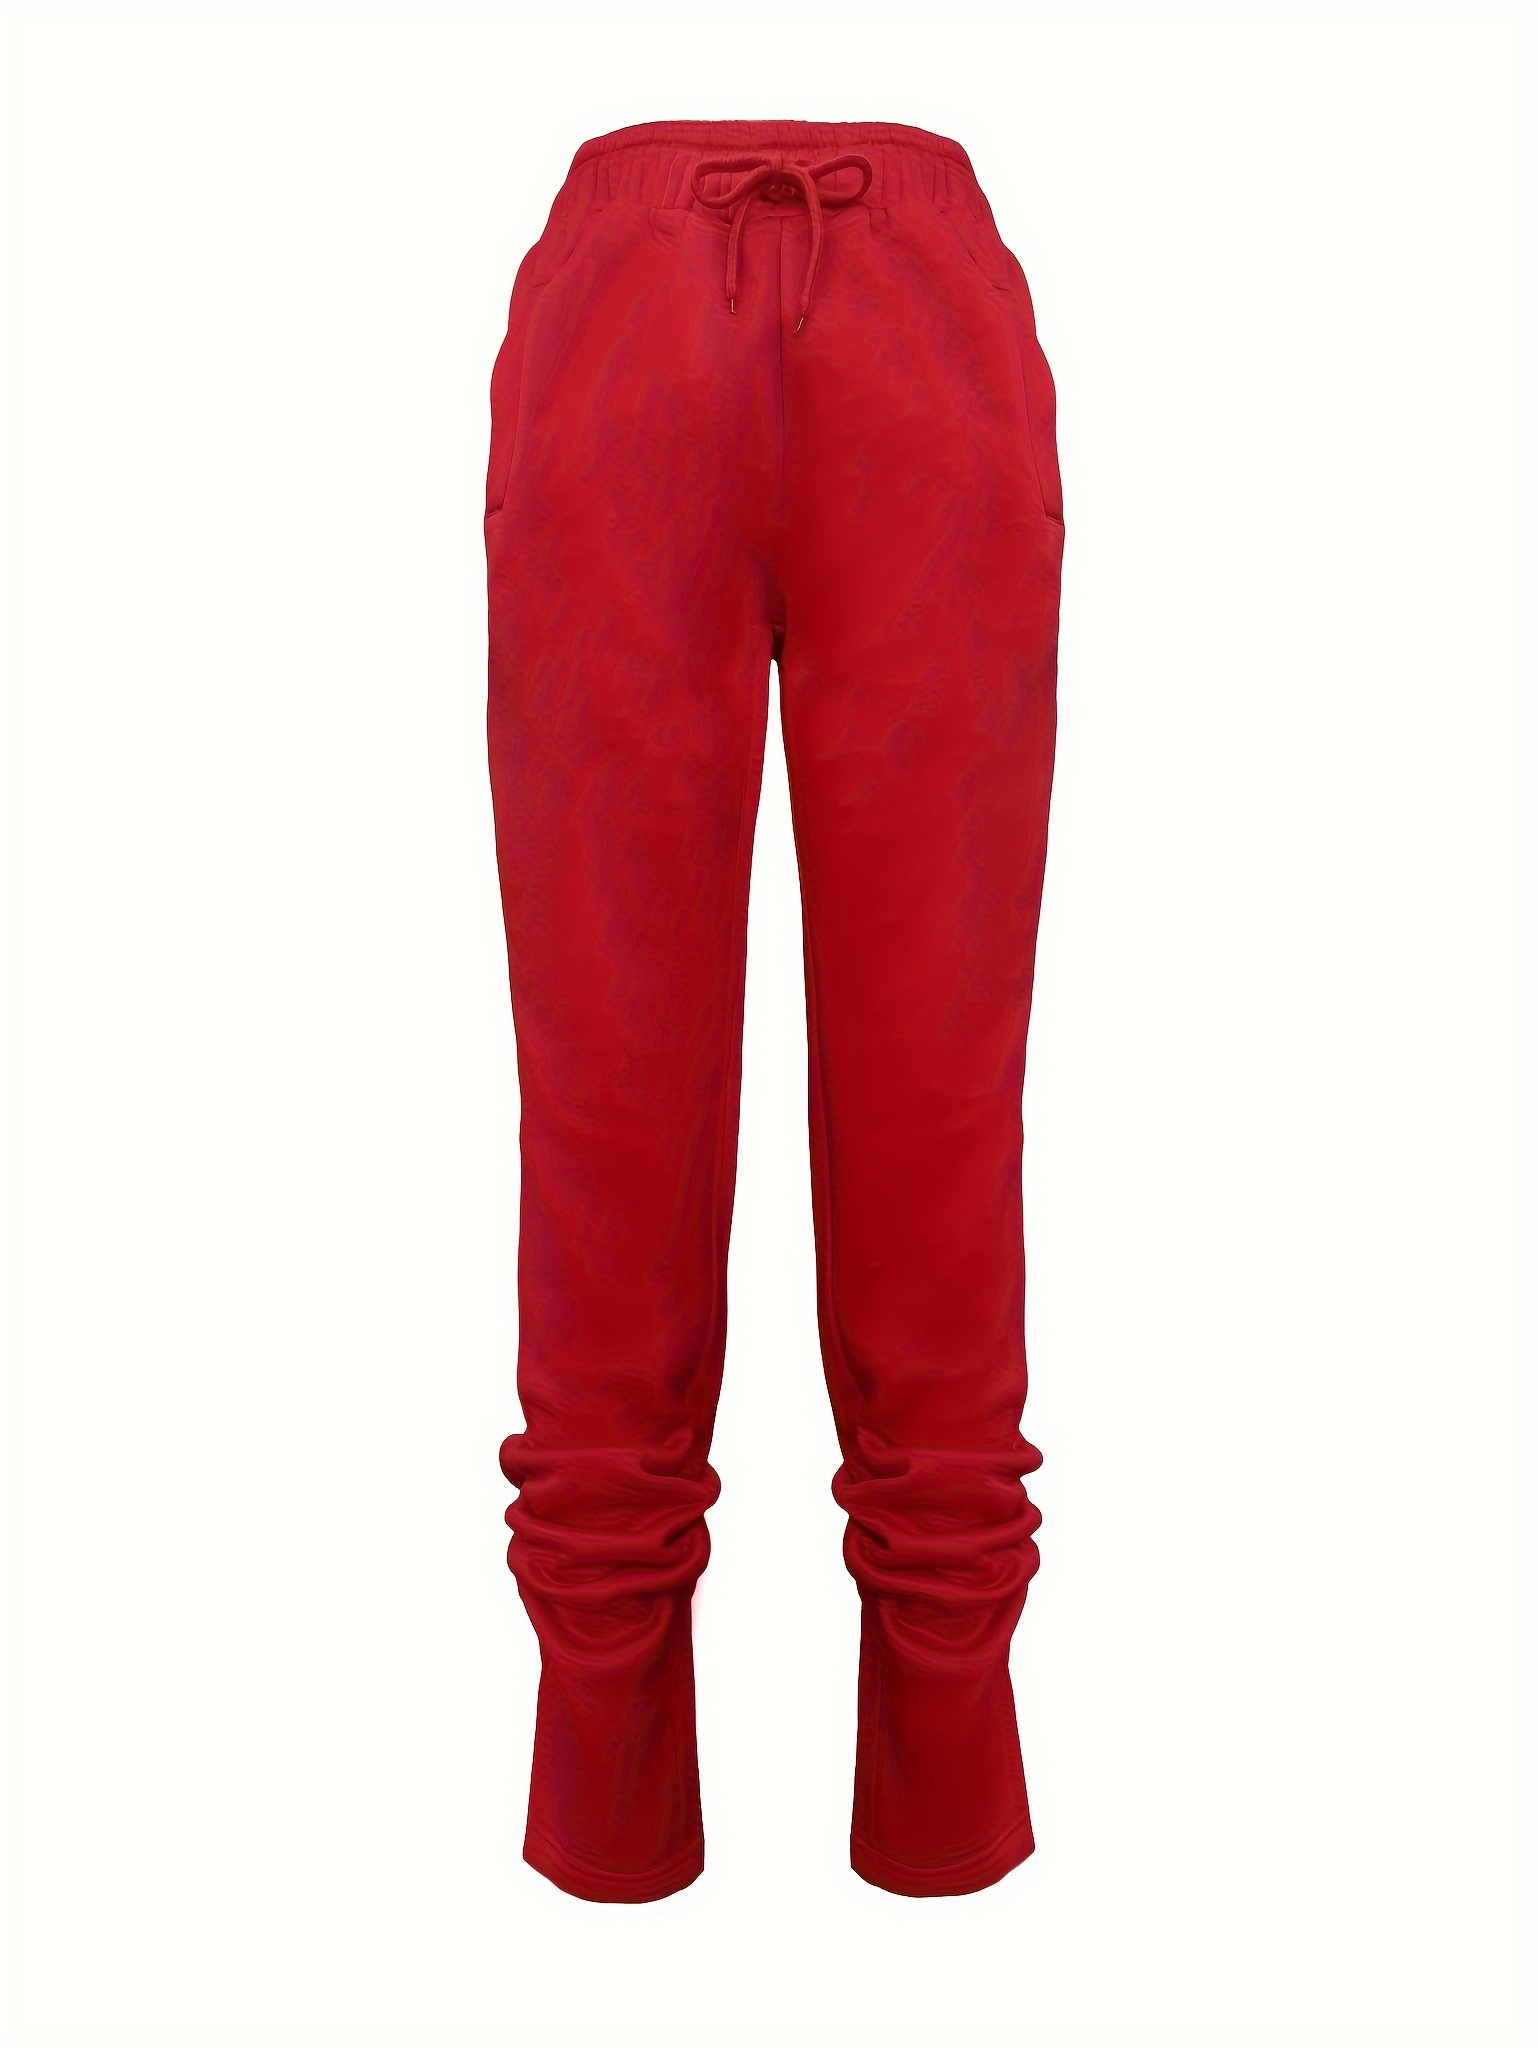 Airpow Clearance Jogger Pants Fashion Women Solid Pockets Drawstring Casual  Mid Waist Leather Long Pants Red XL 